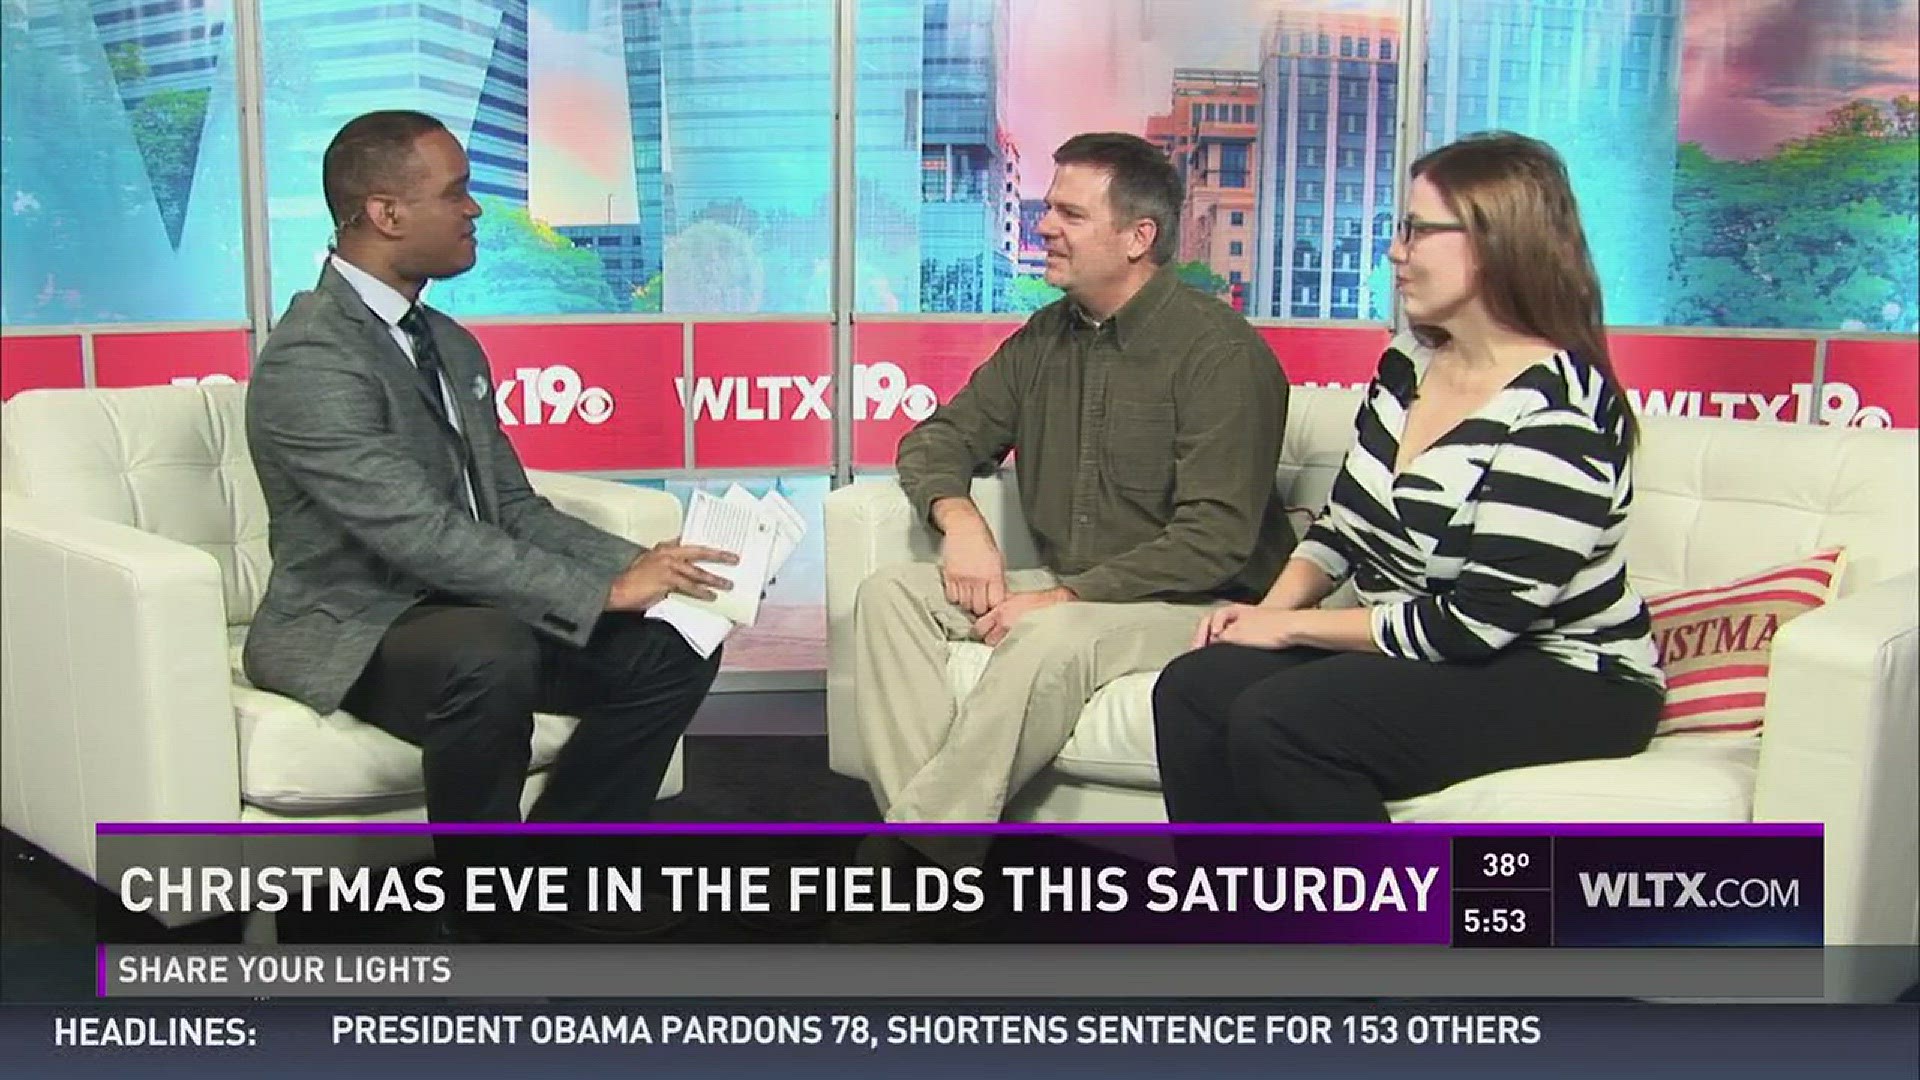 Pastor Rhett Sanders and Heather Heuman, of Blythewood Presbyterian, join Deon Guillory to talk about where you can spend your Christmas Eve this Saturday.